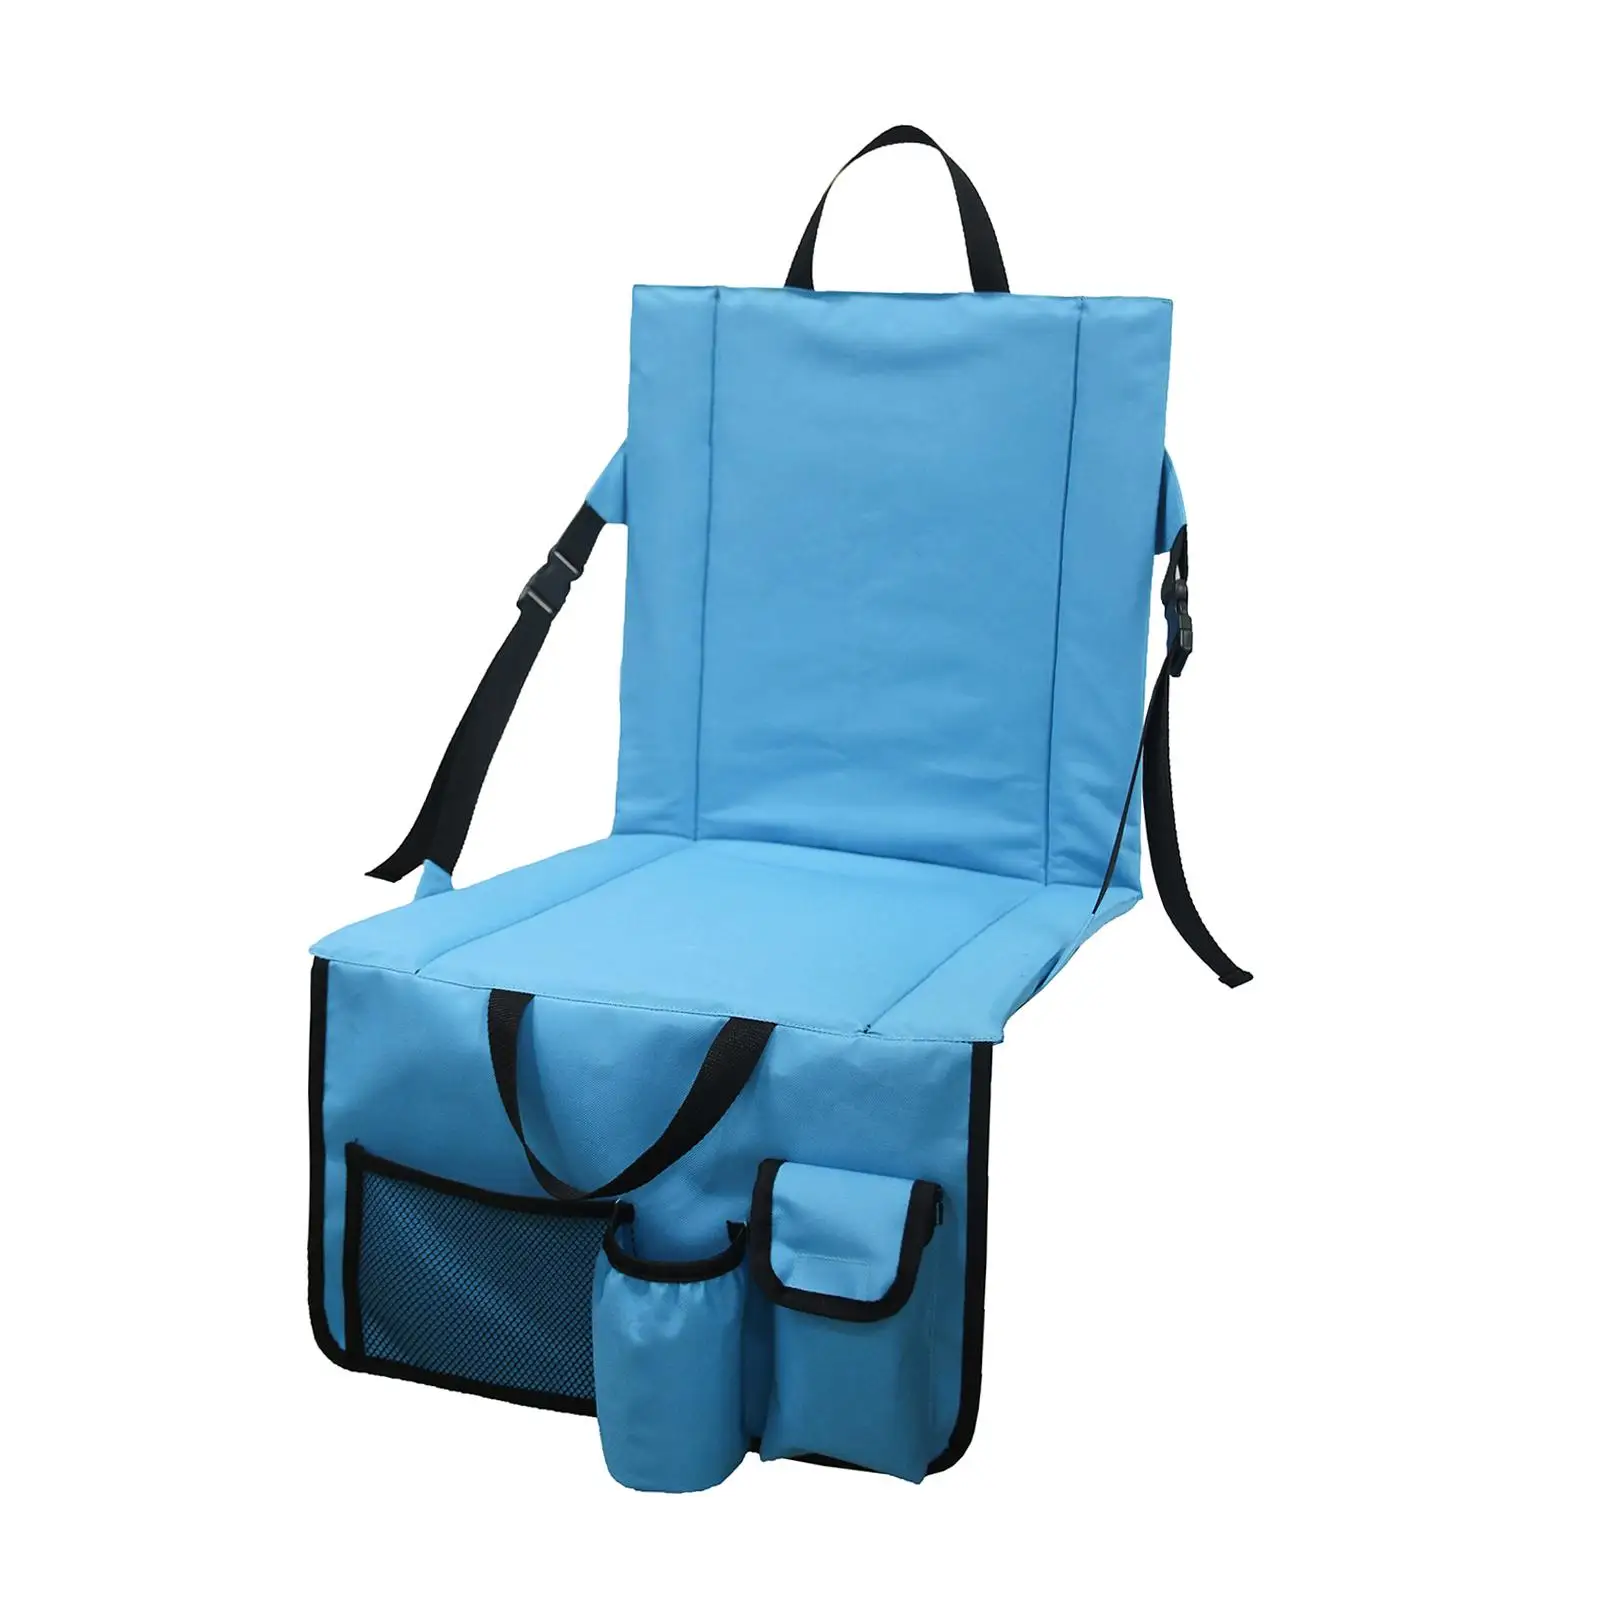 Folding Stadium Chair with Pocket Cushion Adjustable Sit Mat Oxford Cloth Cup Holder for Camping Beach Picnic Backpacking Travel